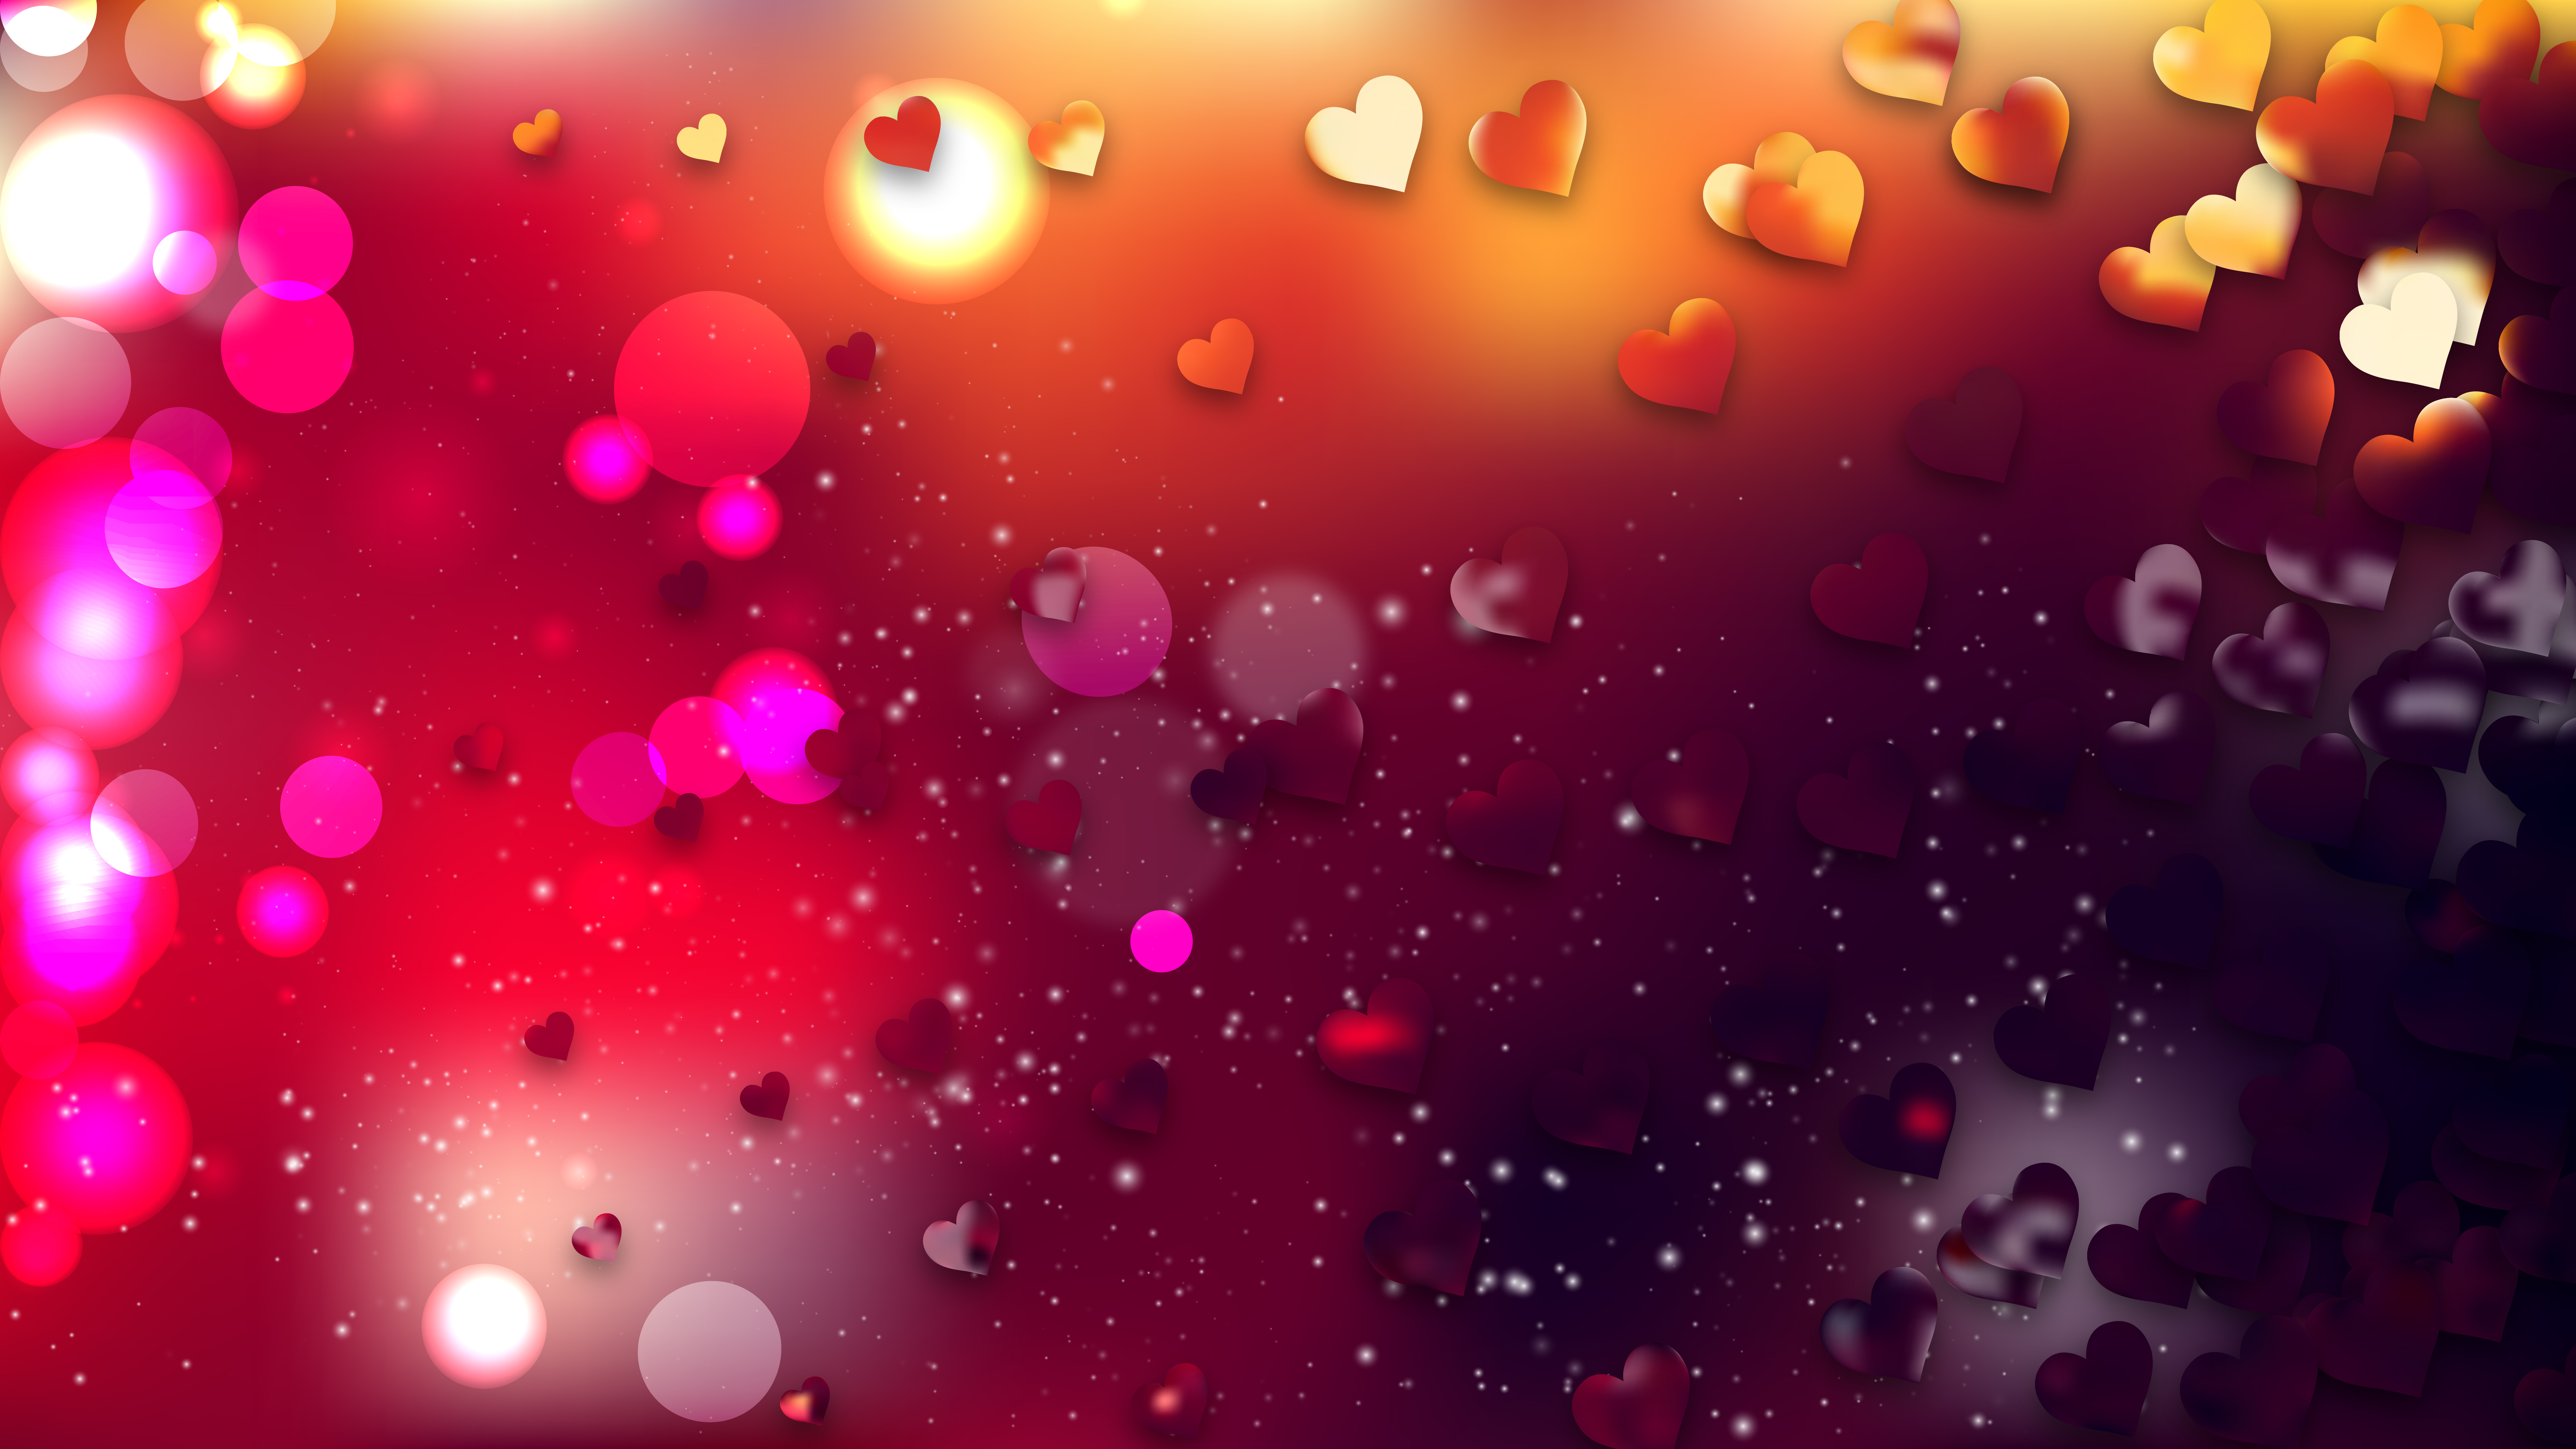 Free Red and Black Love Background Vector Image